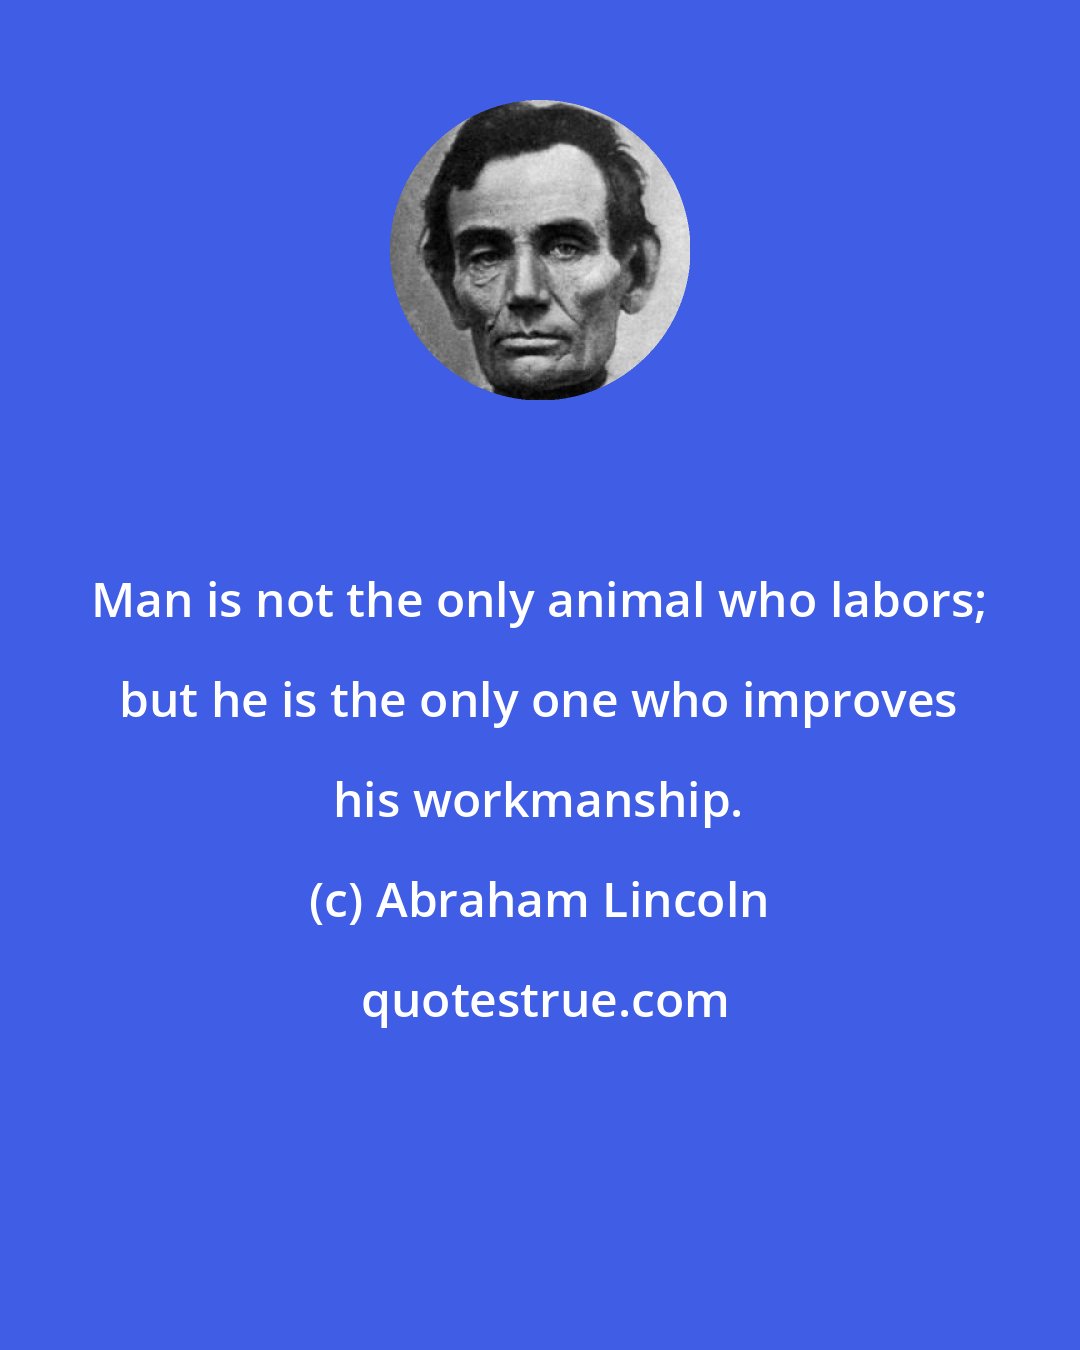 Abraham Lincoln: Man is not the only animal who labors; but he is the only one who improves his workmanship.